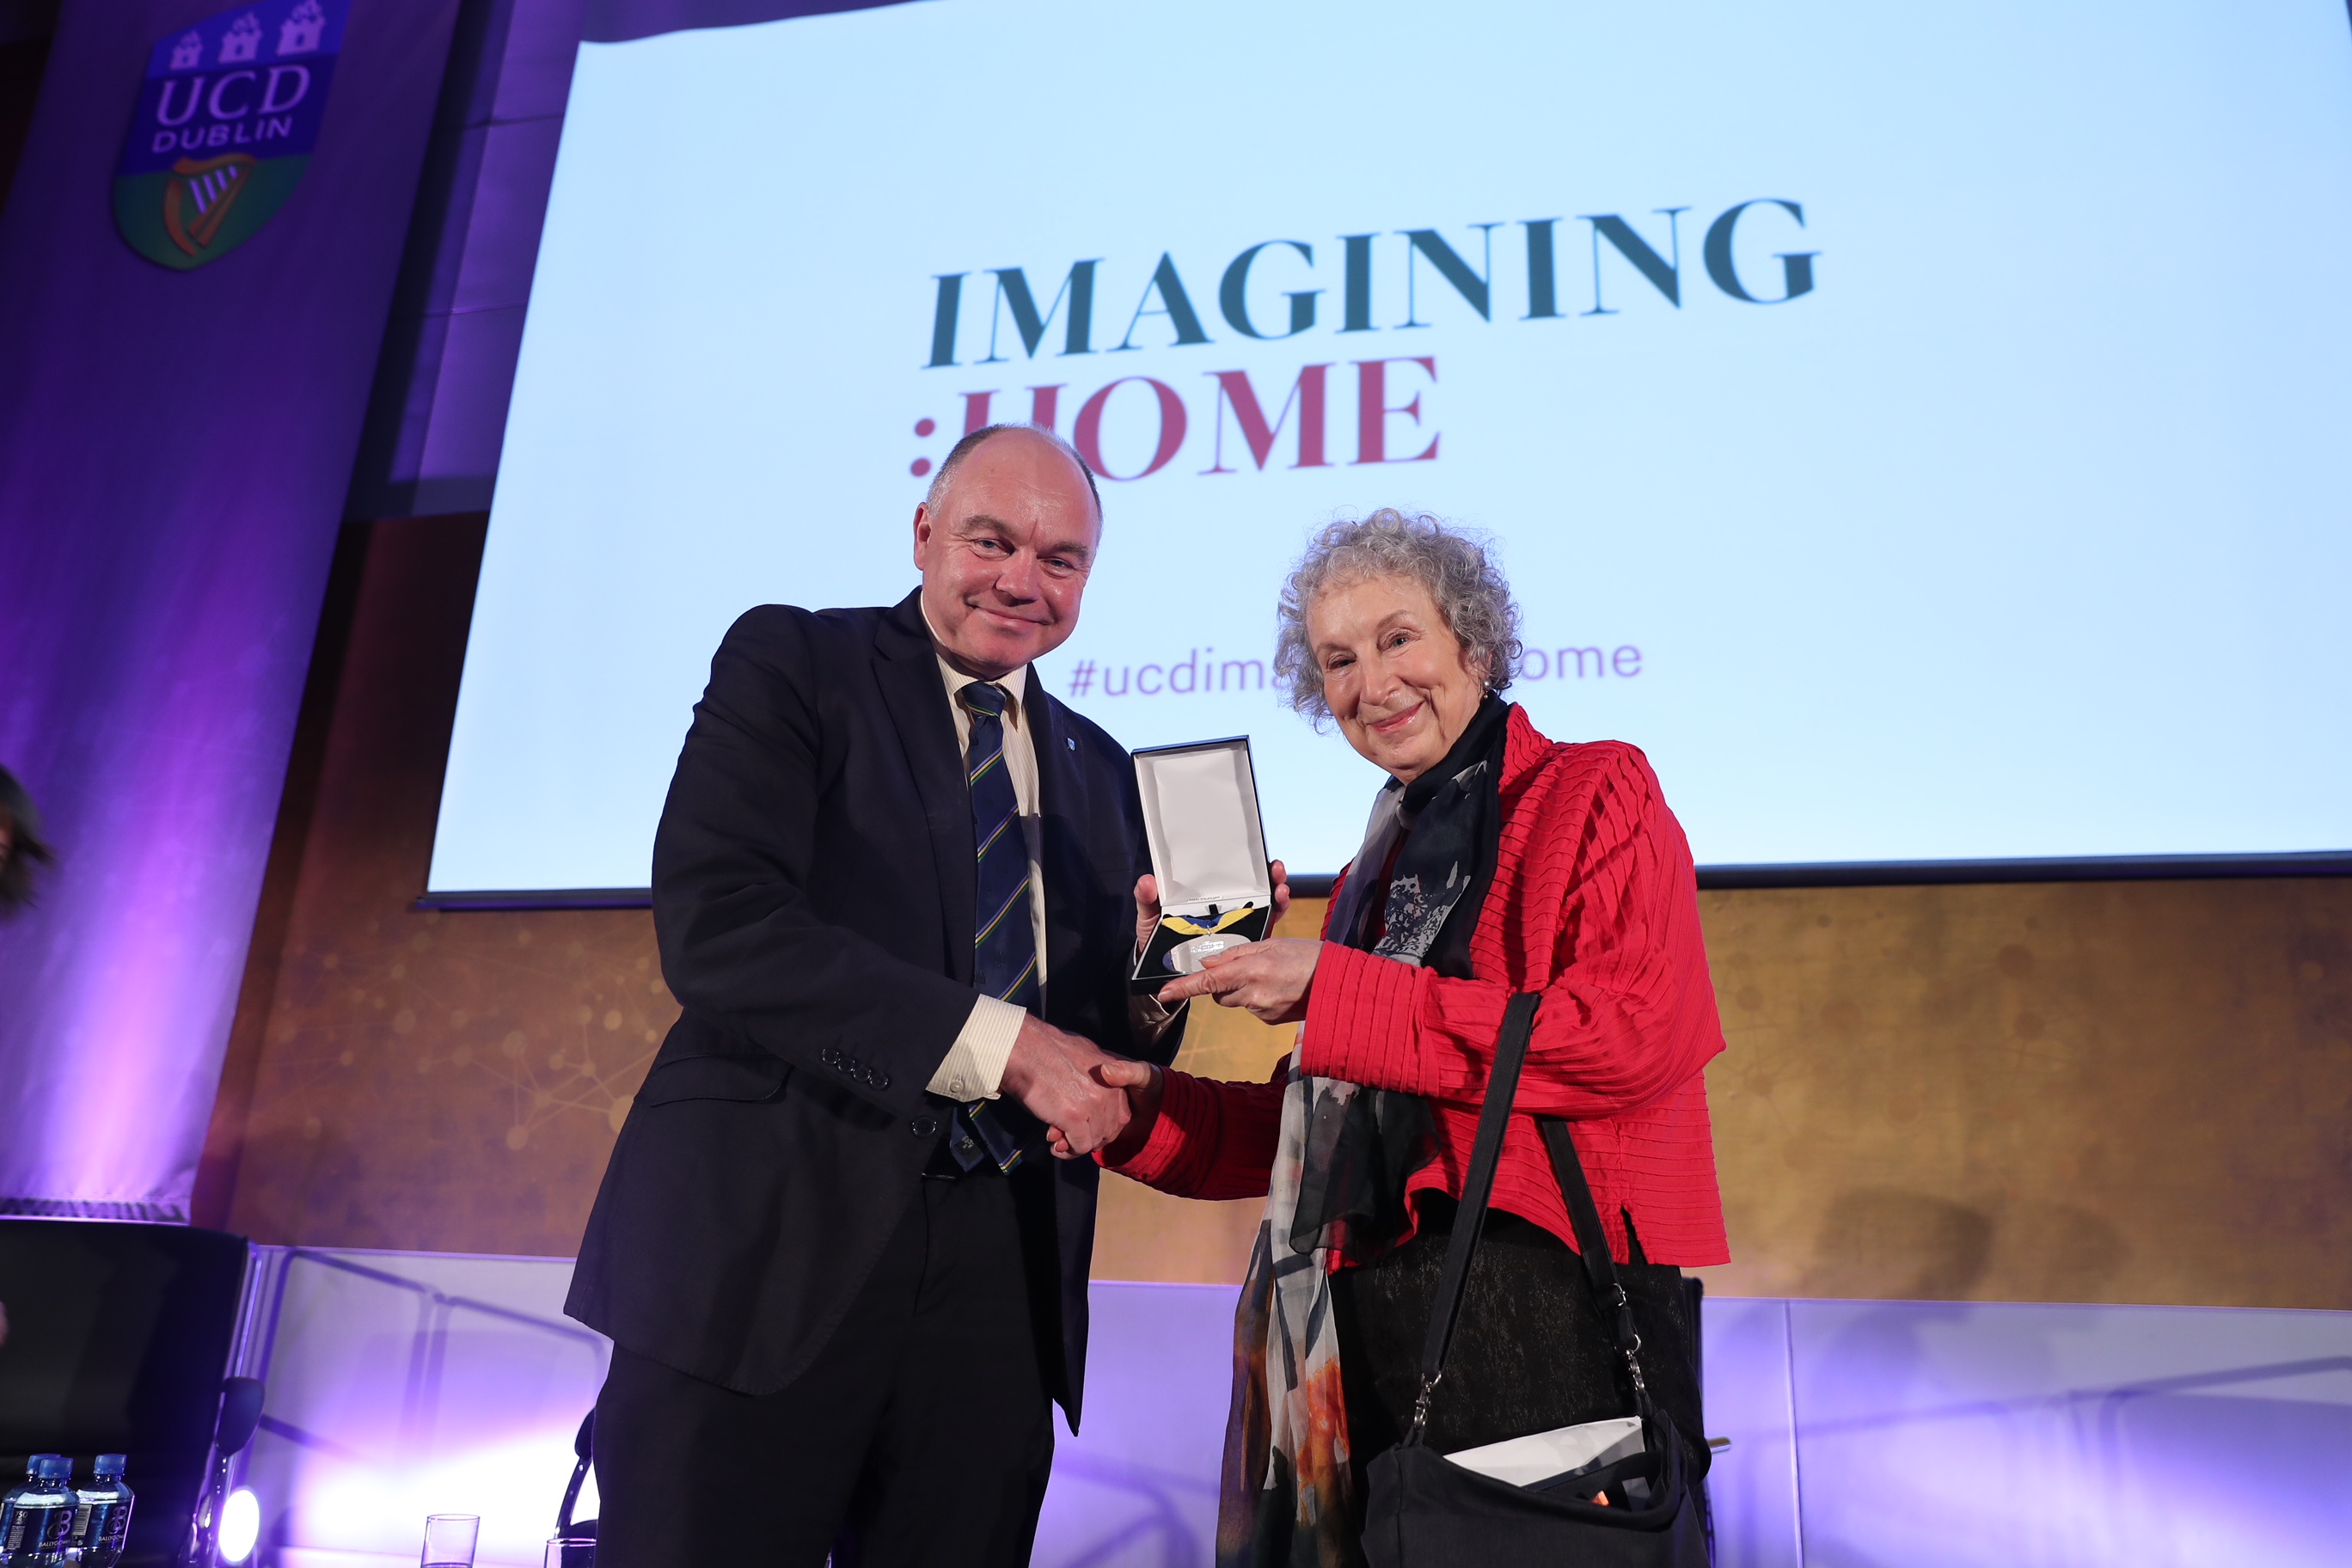 A photo of Margaret Atwood and her Ulysses Medal with President Andrew Deeks